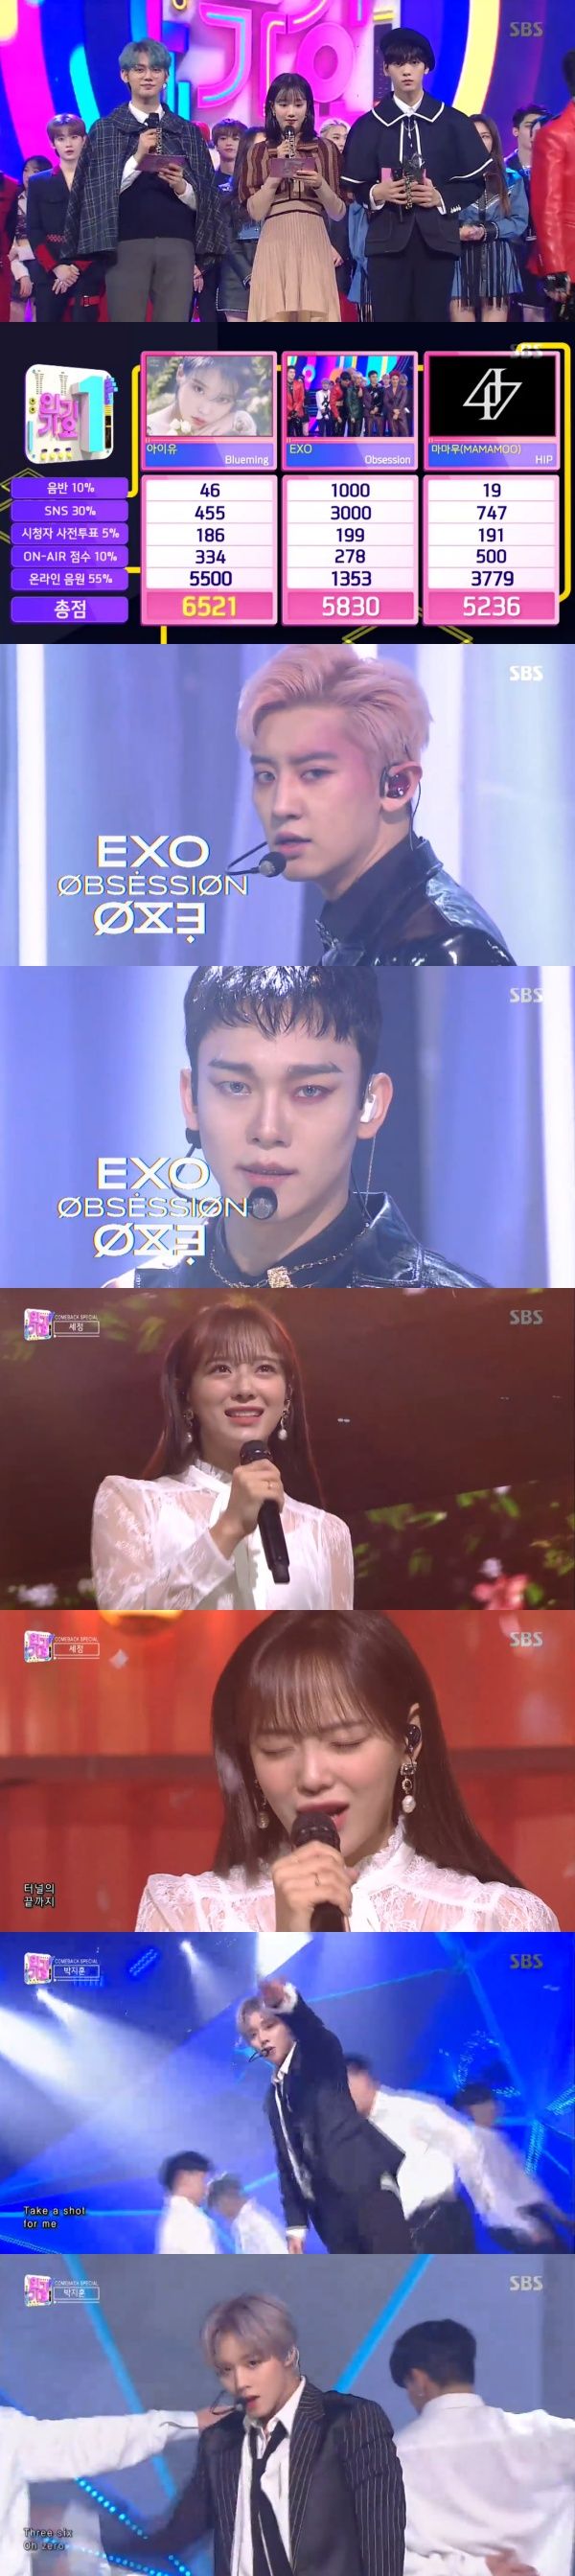 EXO, Sejeong and Park Jihoon came back with the IU taking the first place in the second week of Inkigayo in December.In the SBS music program Inkigayo, which aired on the 8th, IUs Blueming, EXOs Obsession and Mamamus HIP were nominated for the first place in the second week of December.The first place glory went to IU as a result of adding music, SNS, viewer pre-voting, Live broadcast, and online music score.The IU succeeded in winning the top spot without appearing on the show, and MCs said, I will make sure that this trophy is delivered.On the other hand, EXO made a comeback to its regular 6th album and attracted attention by presenting the title song Obsession stage on the day.Option is a song that shows synergies between addictive hip-hop dance genre and EXOs hip energy.EXOs dark charisma led to the cheers of fans through lyrics and vocals that directly solved the intention to escape from the darkness of the terrible obsession.In addition, Sejeong and Park Jihoon, who returned to solo from the ball club, also made a comeback stage. Sejeong conveyed emotional and affectionate feelings with the ballad song Tunnel.Park Jihoon completed the confident stage with the title song 360.In addition, Lee Jun-young, who stood alone in the group U-Kiss, set up the stage of Im curious. He completed the full stage alone and received applause from fans.Golden Child, Kim Young-chul, Nature, Park Jihoon, Bandit, Seven Clac, Astro, Ivan, AOA, One-on-One, Space Girl and One Team have completed the rich Inkigayo.